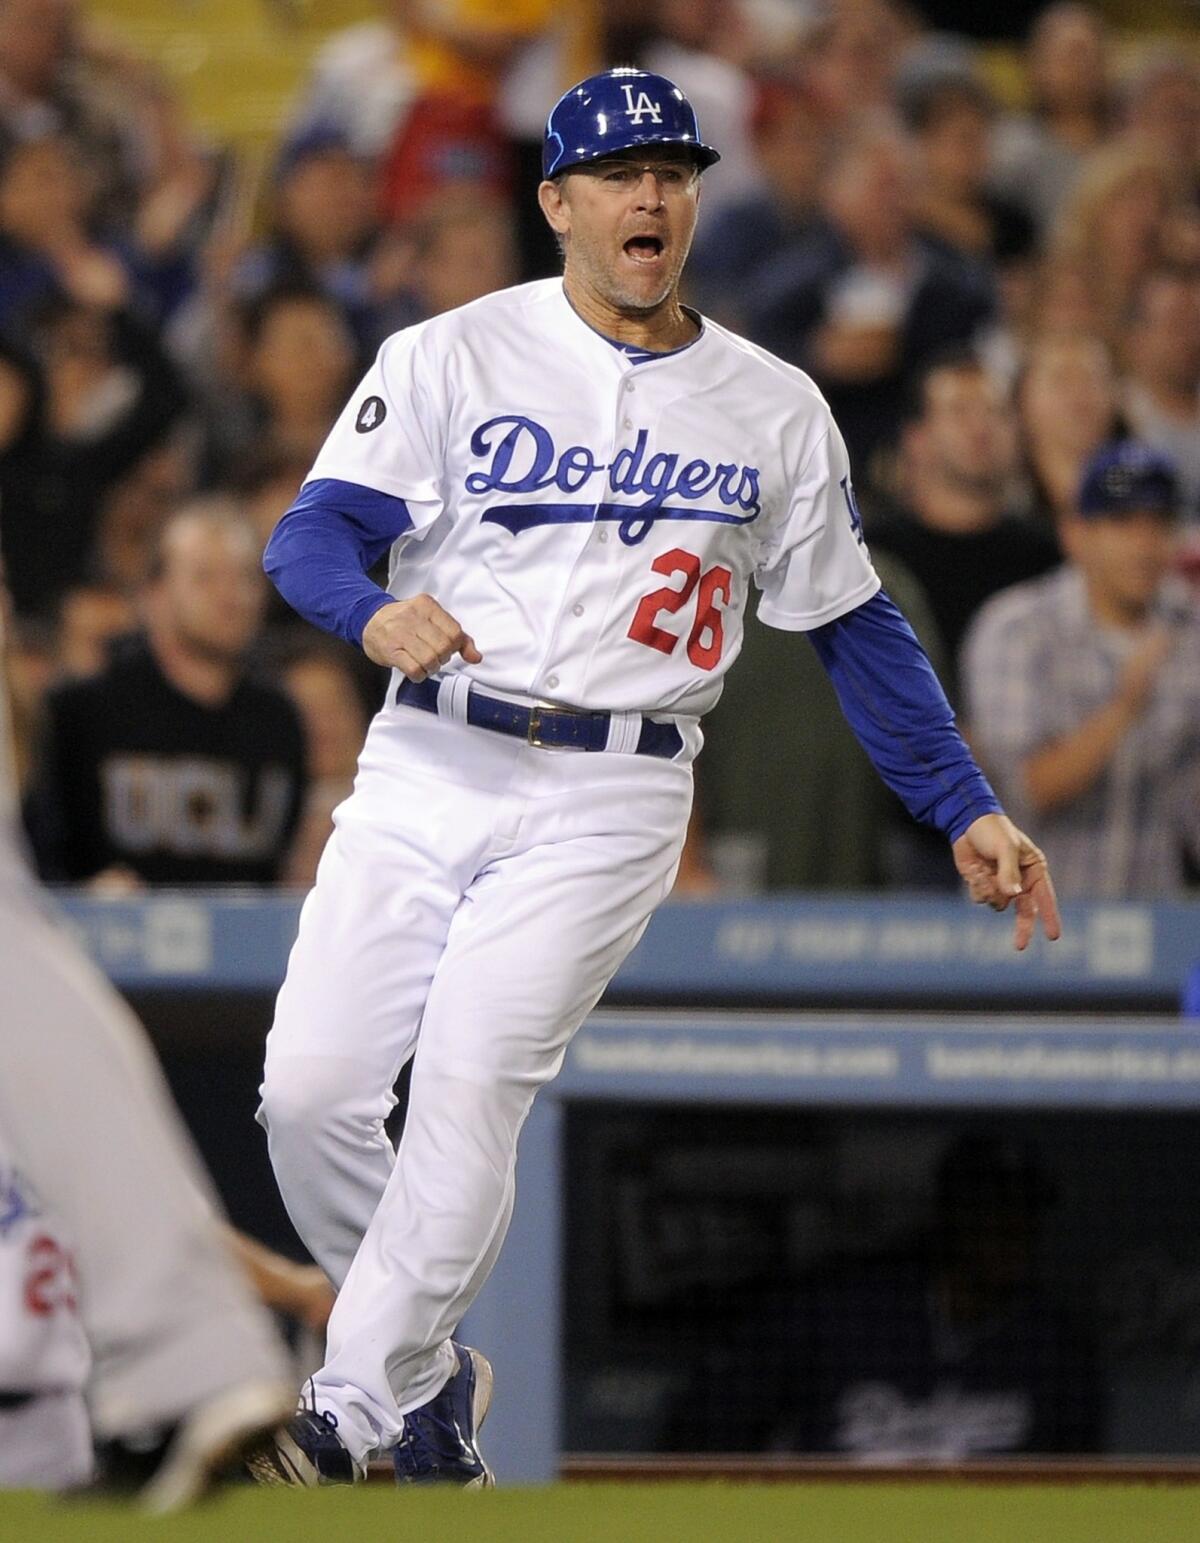 Tim Wallach has served as the Dodgers' third-base coach since 2011.